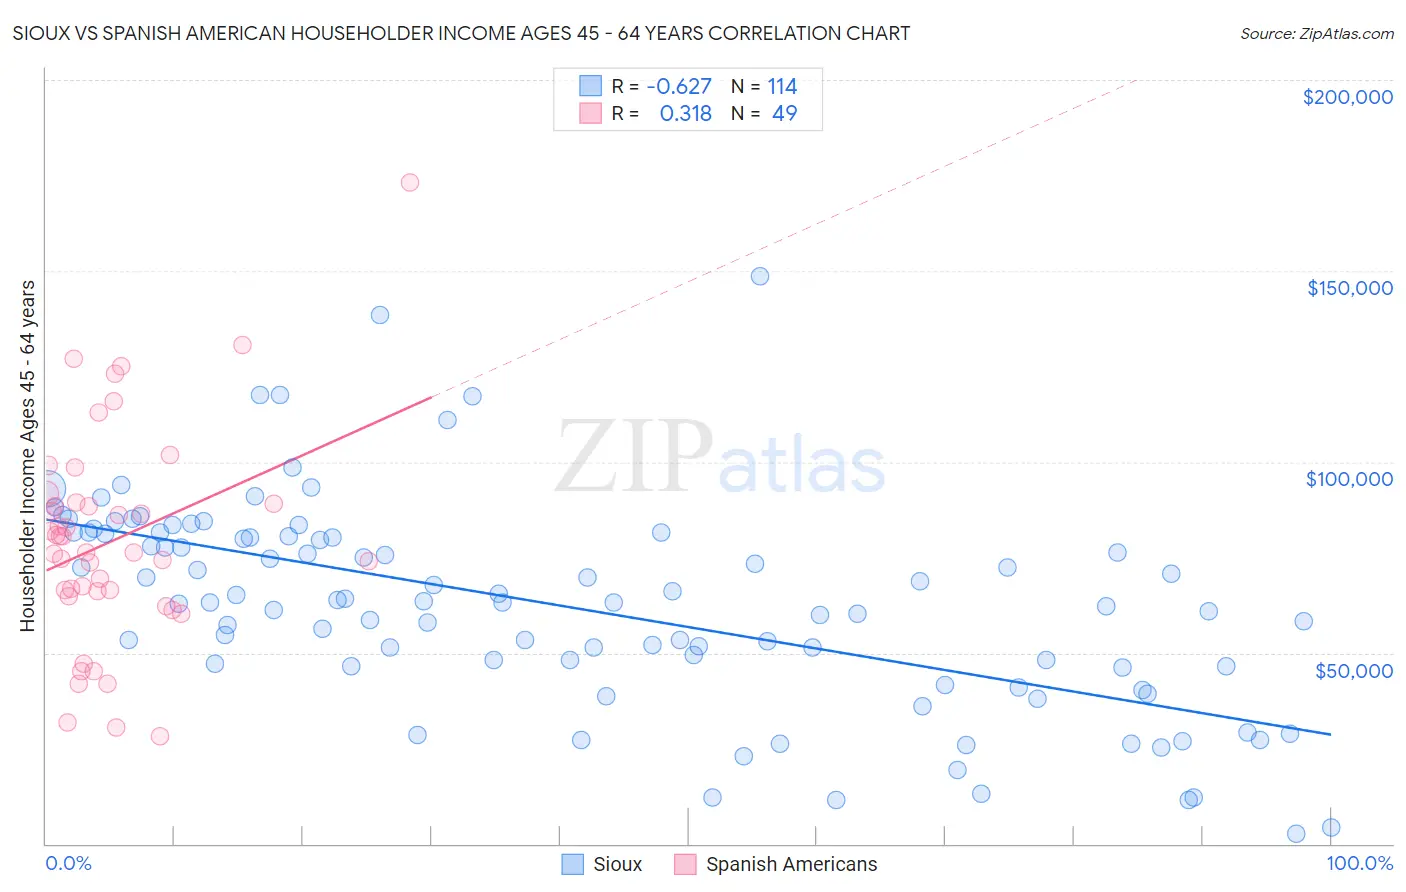 Sioux vs Spanish American Householder Income Ages 45 - 64 years